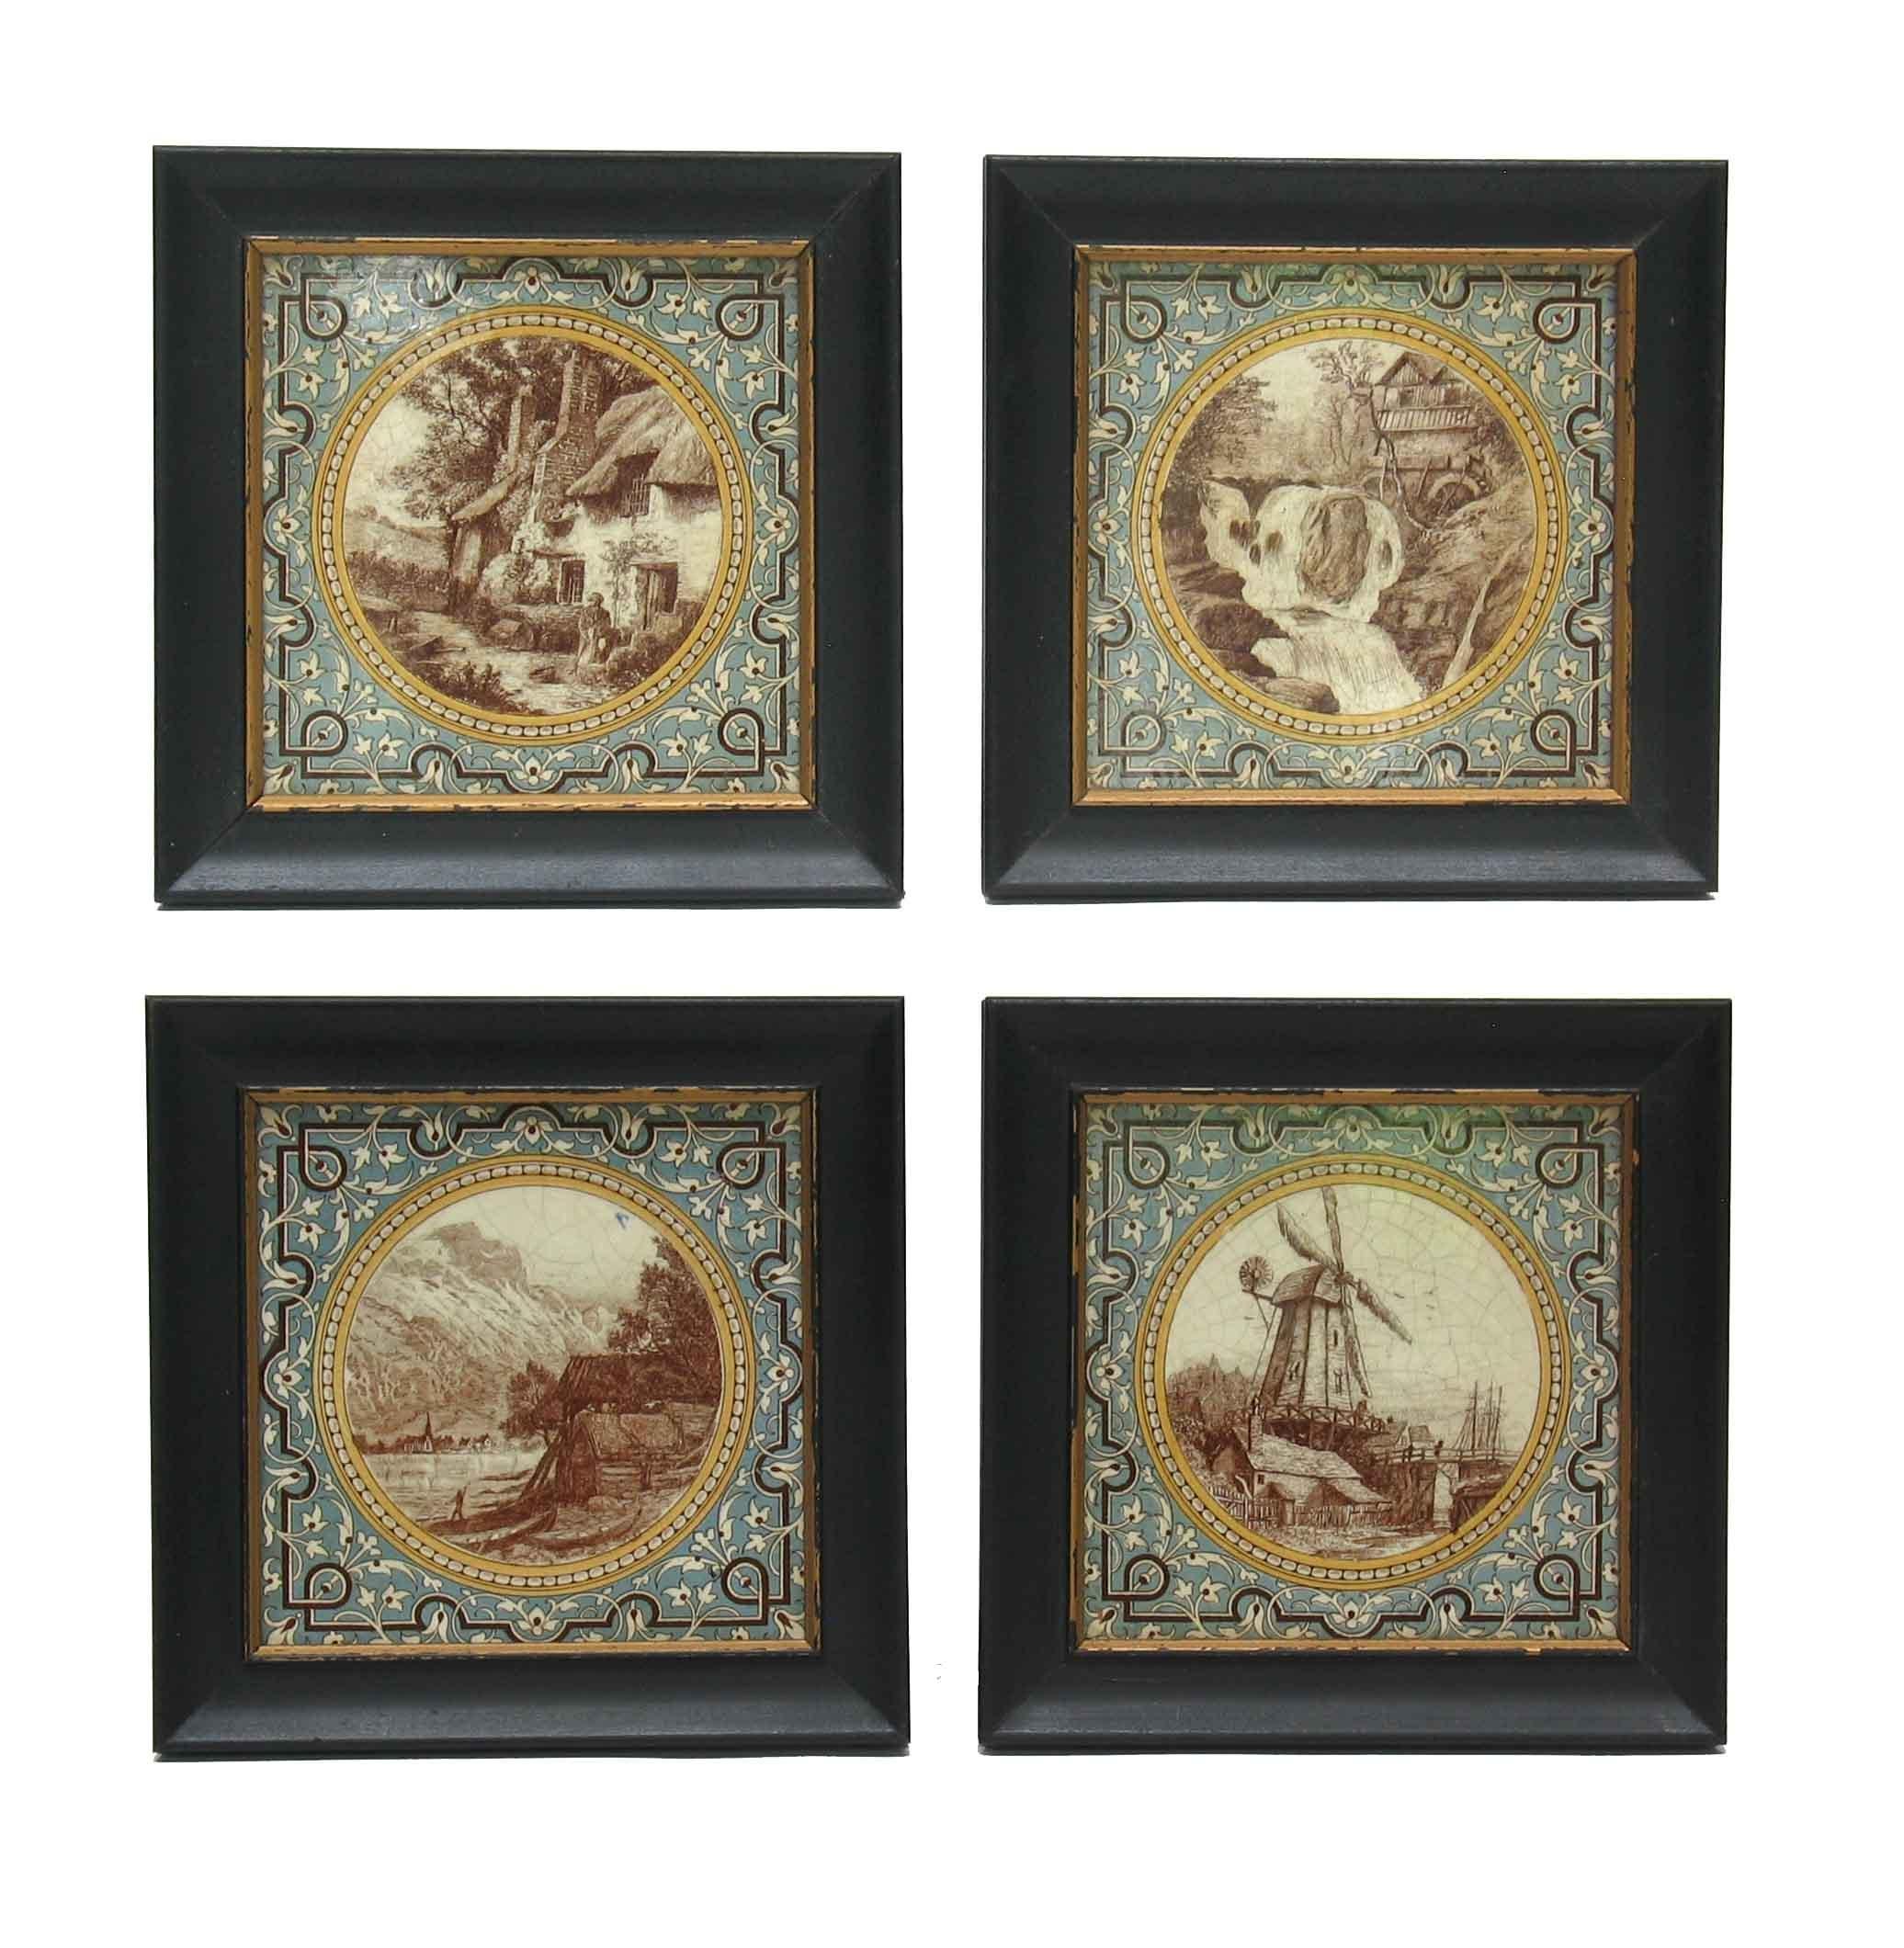 English Four Aesthetic Movement Transfer Printed Minton Tiles BY L.T. SWETNAM Circa 1890